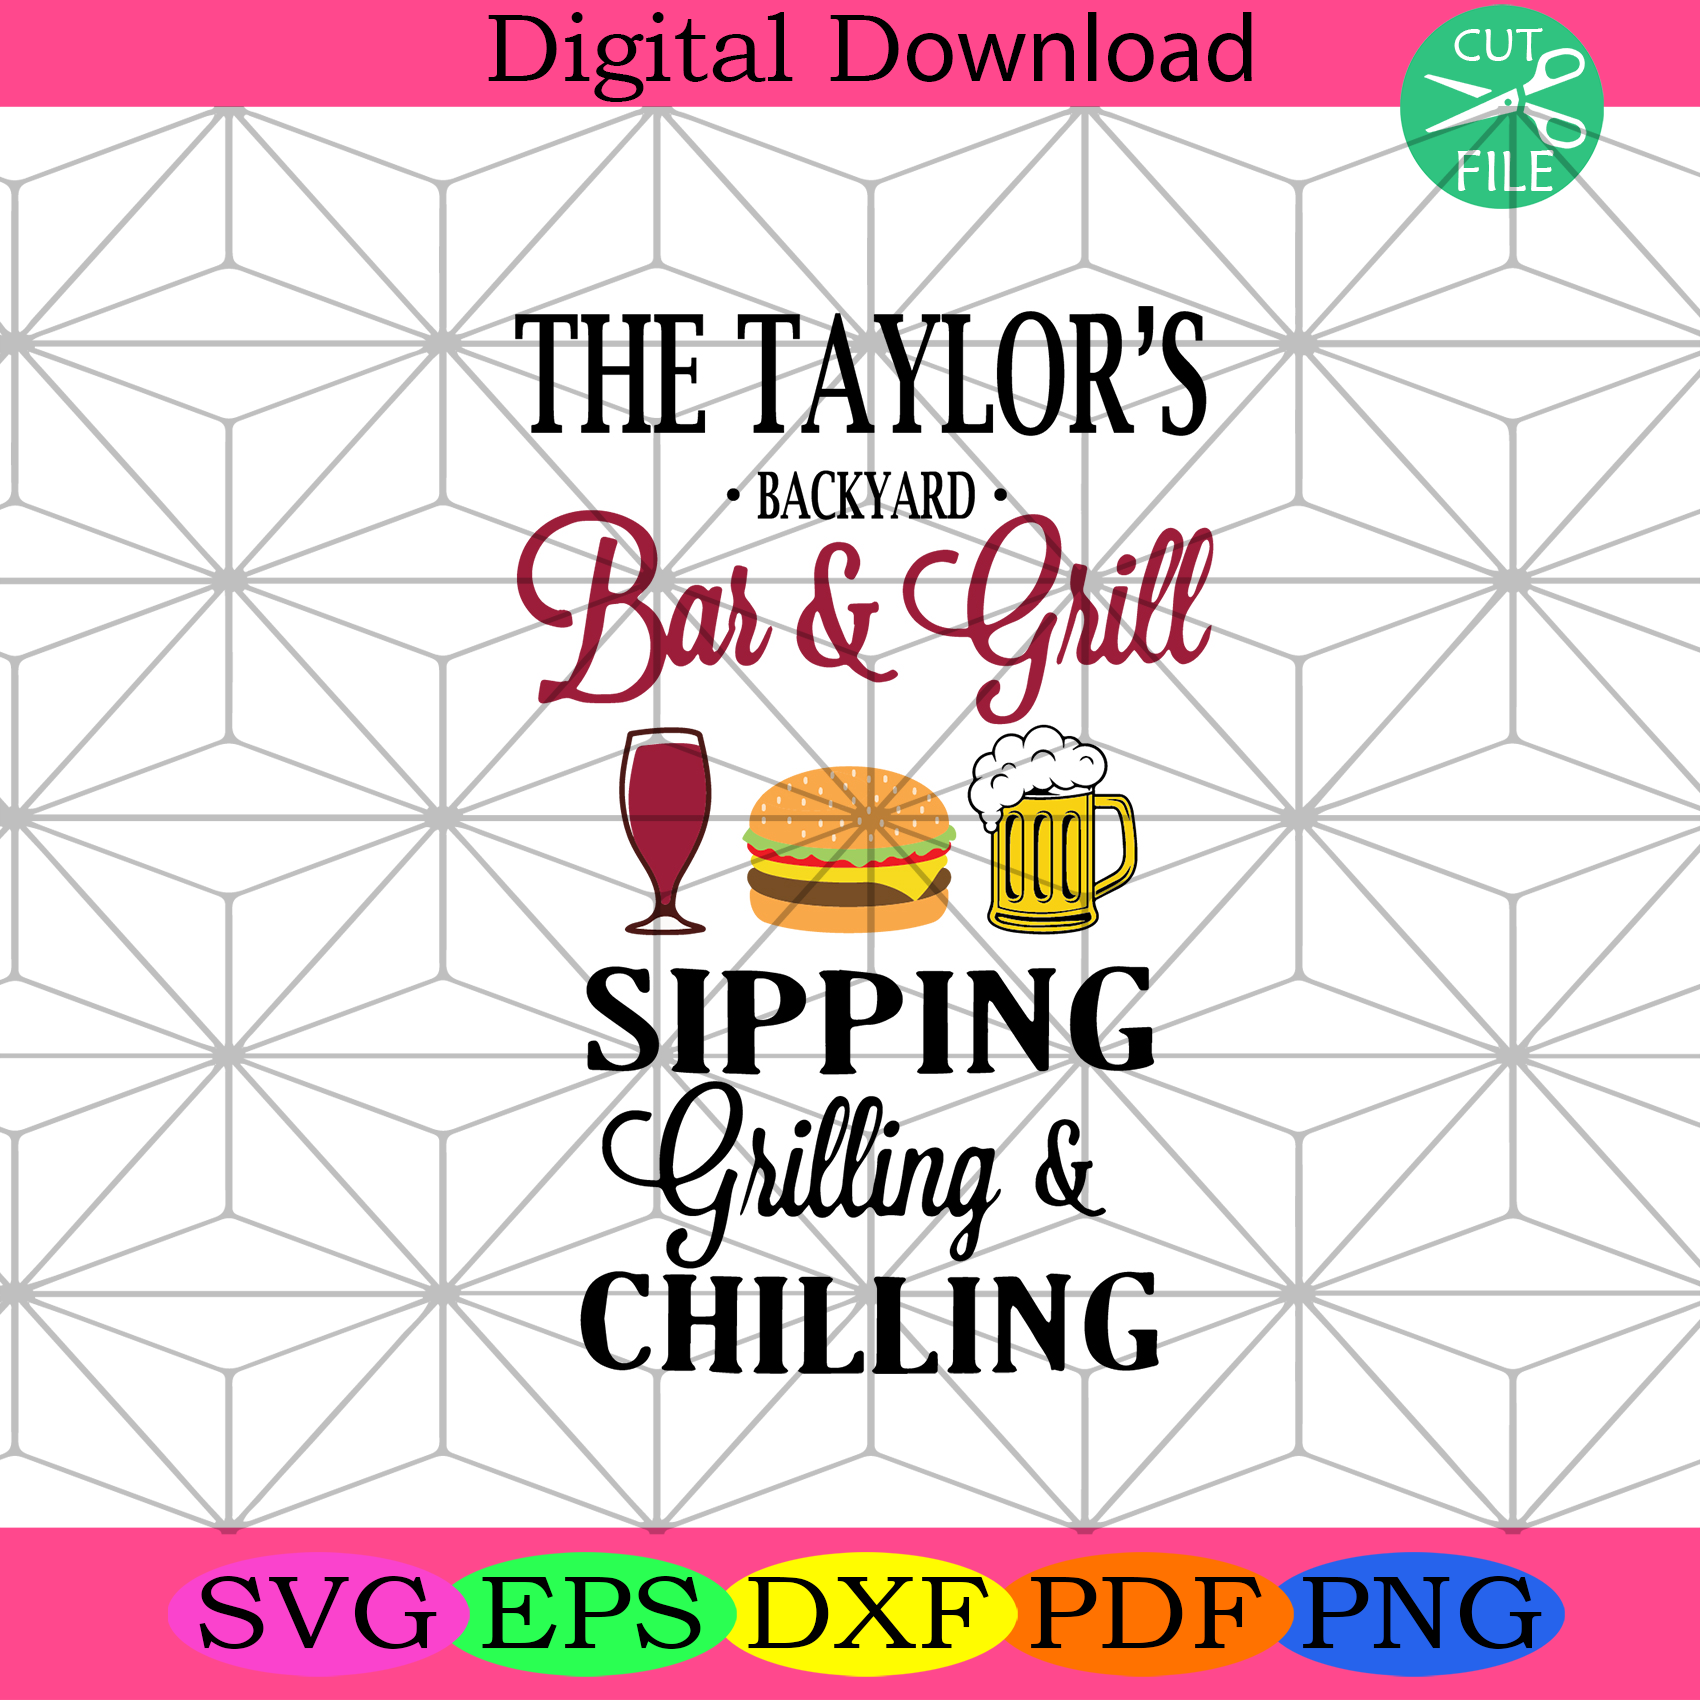 The Taylors Backyard Bars And Grill Sipping Grilling And Chilling Svg